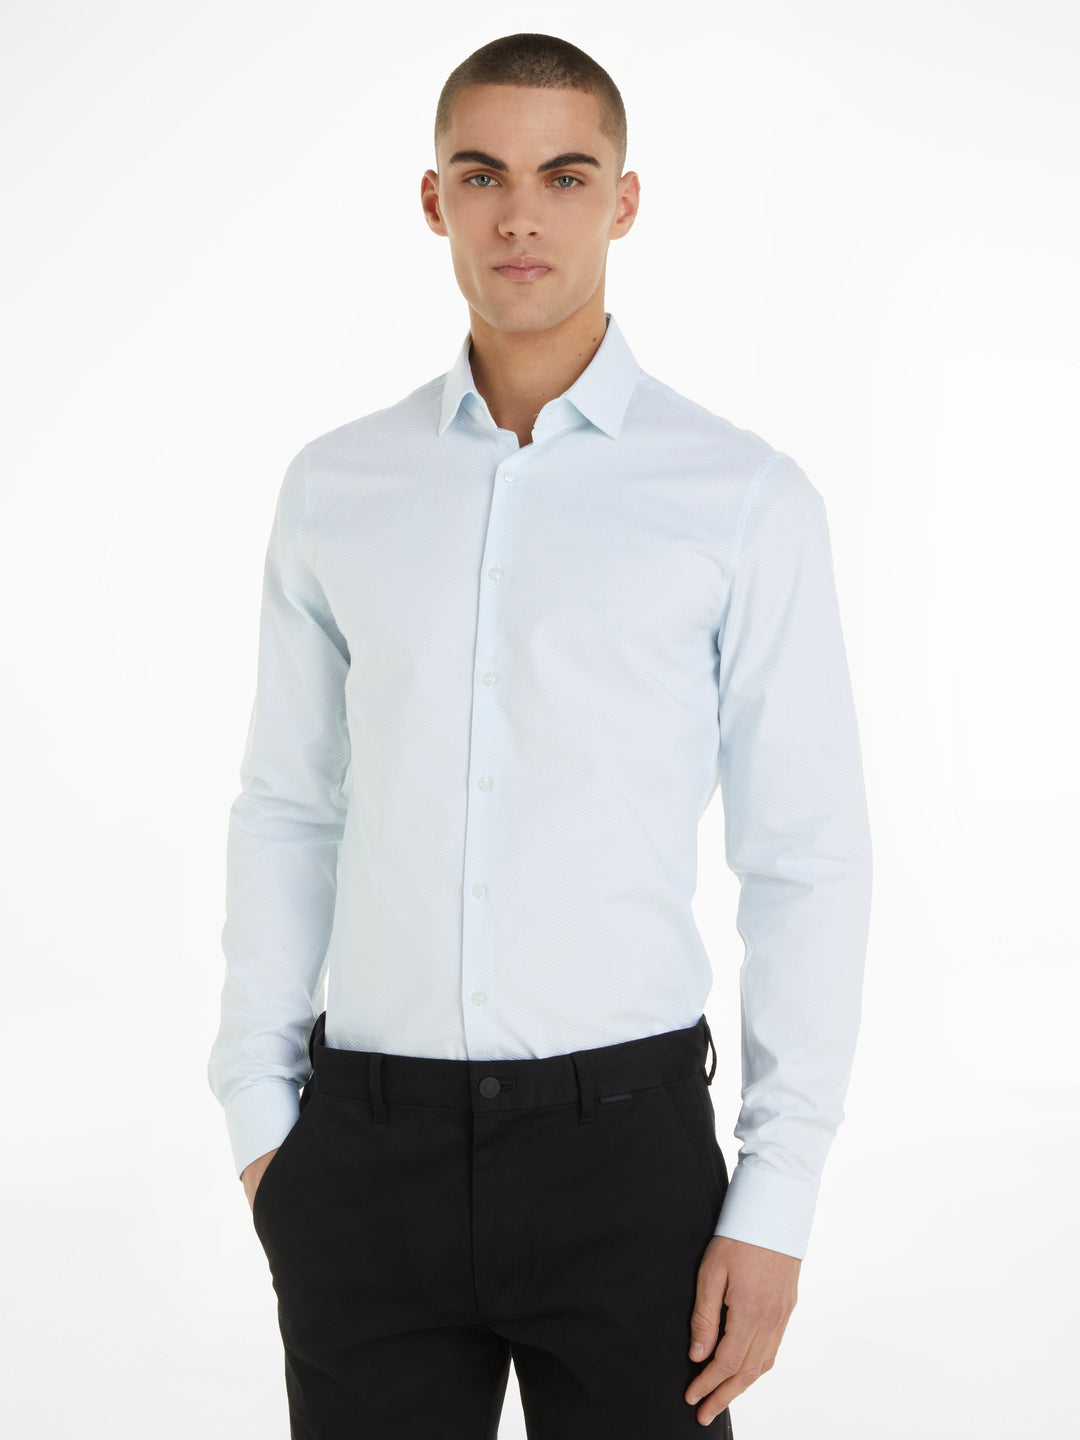 CK STRUCTURE EASY CARE SLIM SHIRT